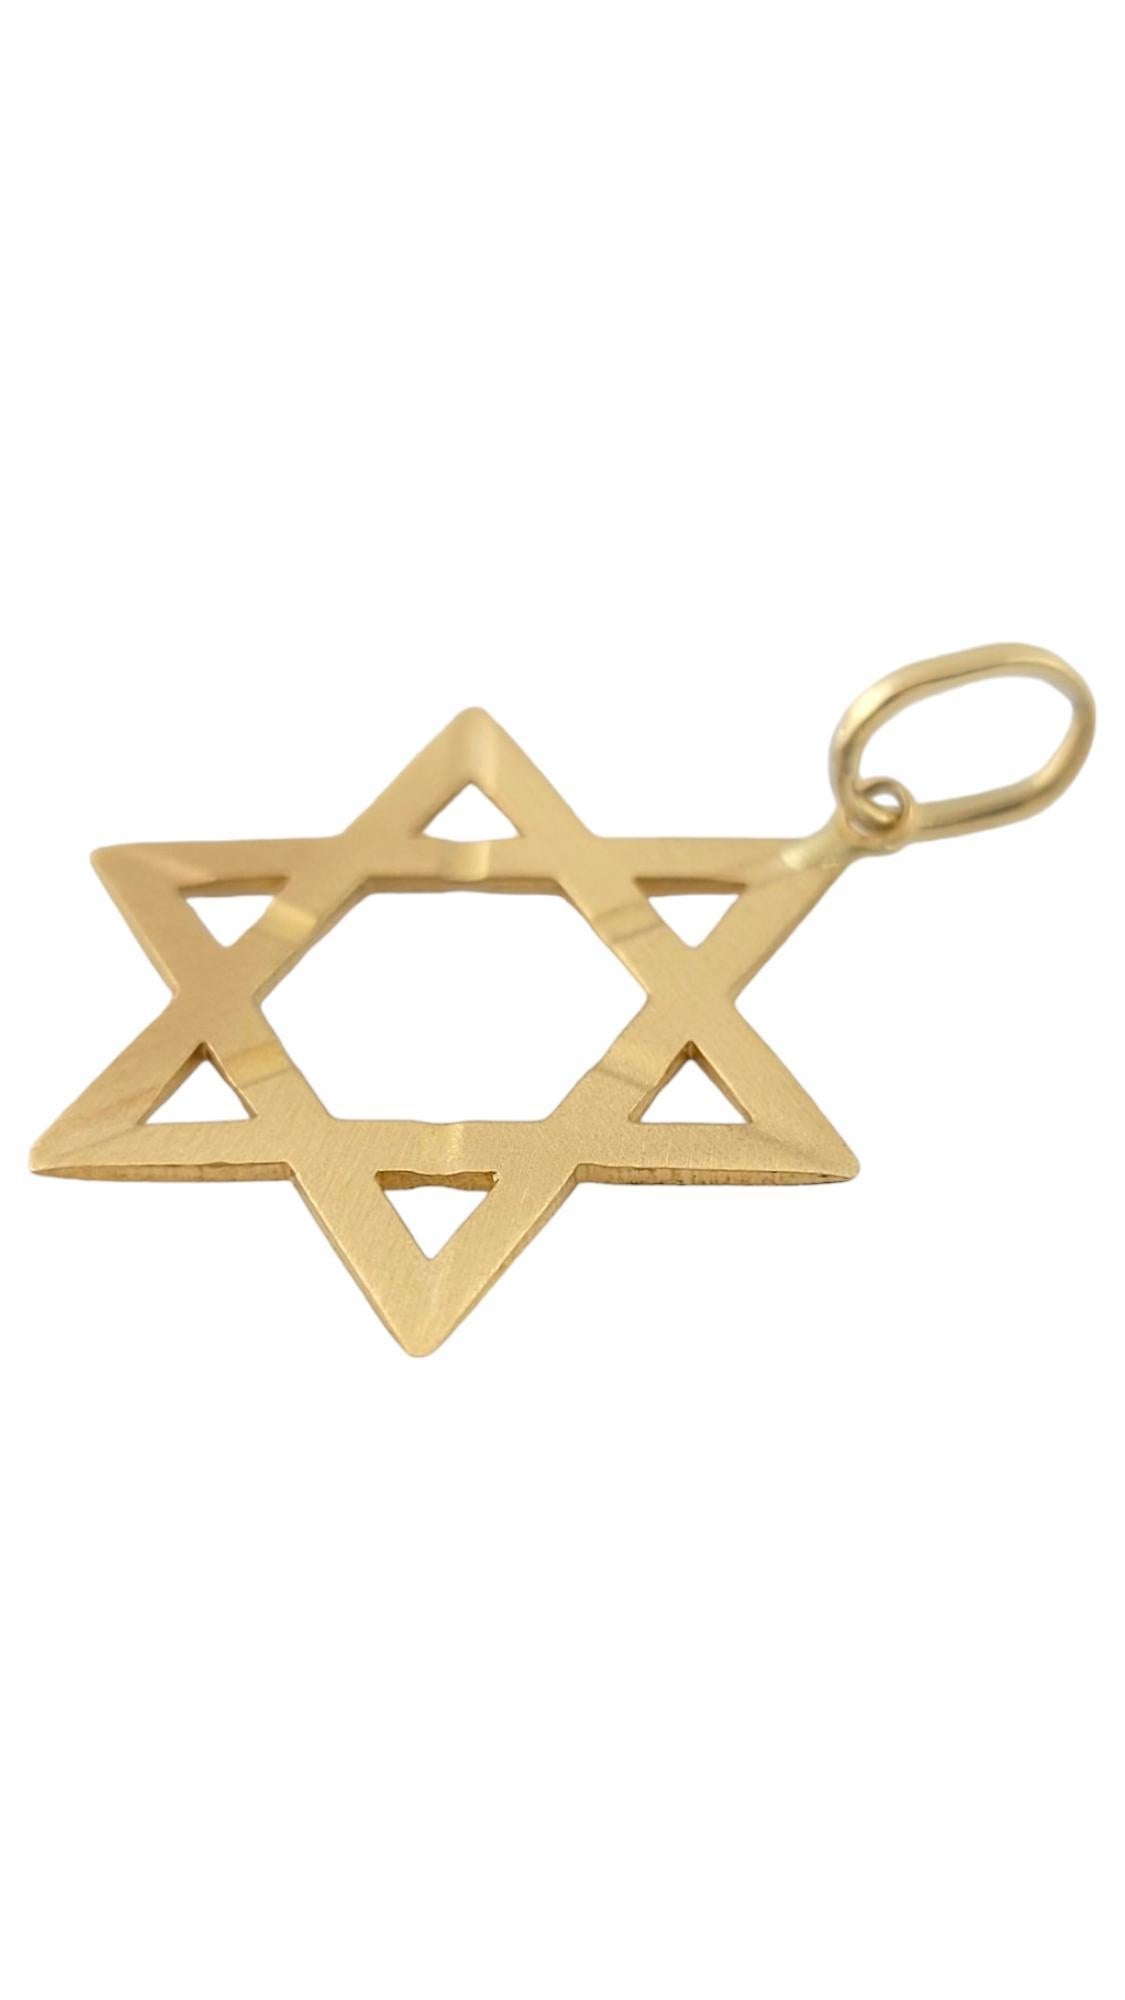 Vintage 14K Yellow Gold Star of David Pendant

This gorgeous star of David pendant is crafted from 14K yellow gold and would look gorgeous on a chain!

Size: 26.75mm X 21.70mm X 0.77mm
Length w/ bail: 33.56mm

Weight: 1.4 dwt/ 2.1 g

Tested